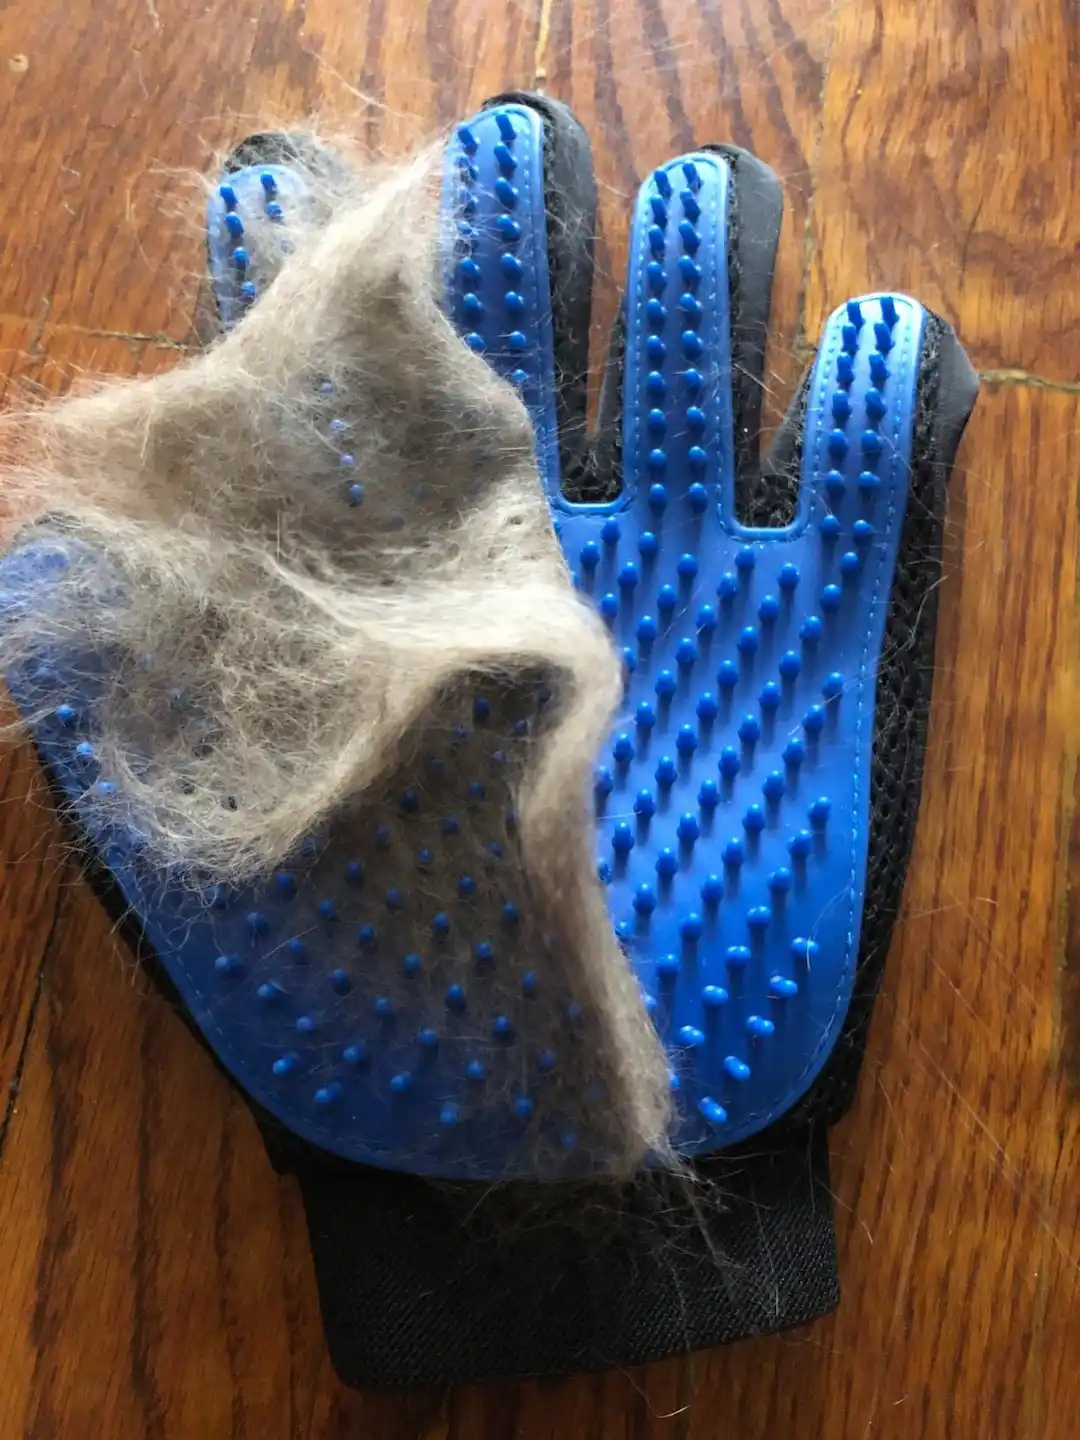 Best brushes for rabbits - Cleaning up Delomo grooming gloves